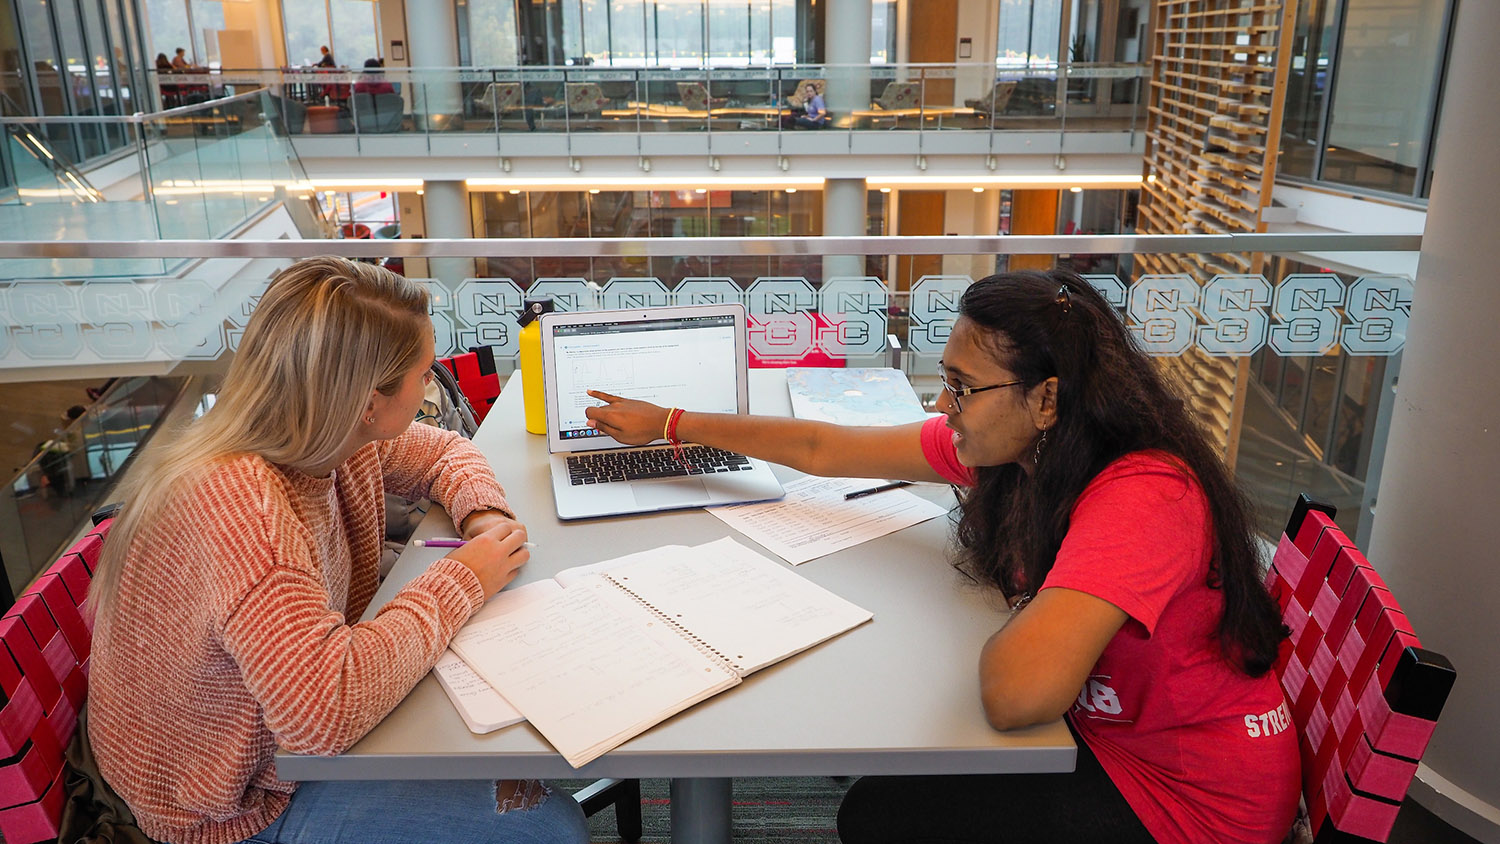 Students work, study and use the Talley Student Union.